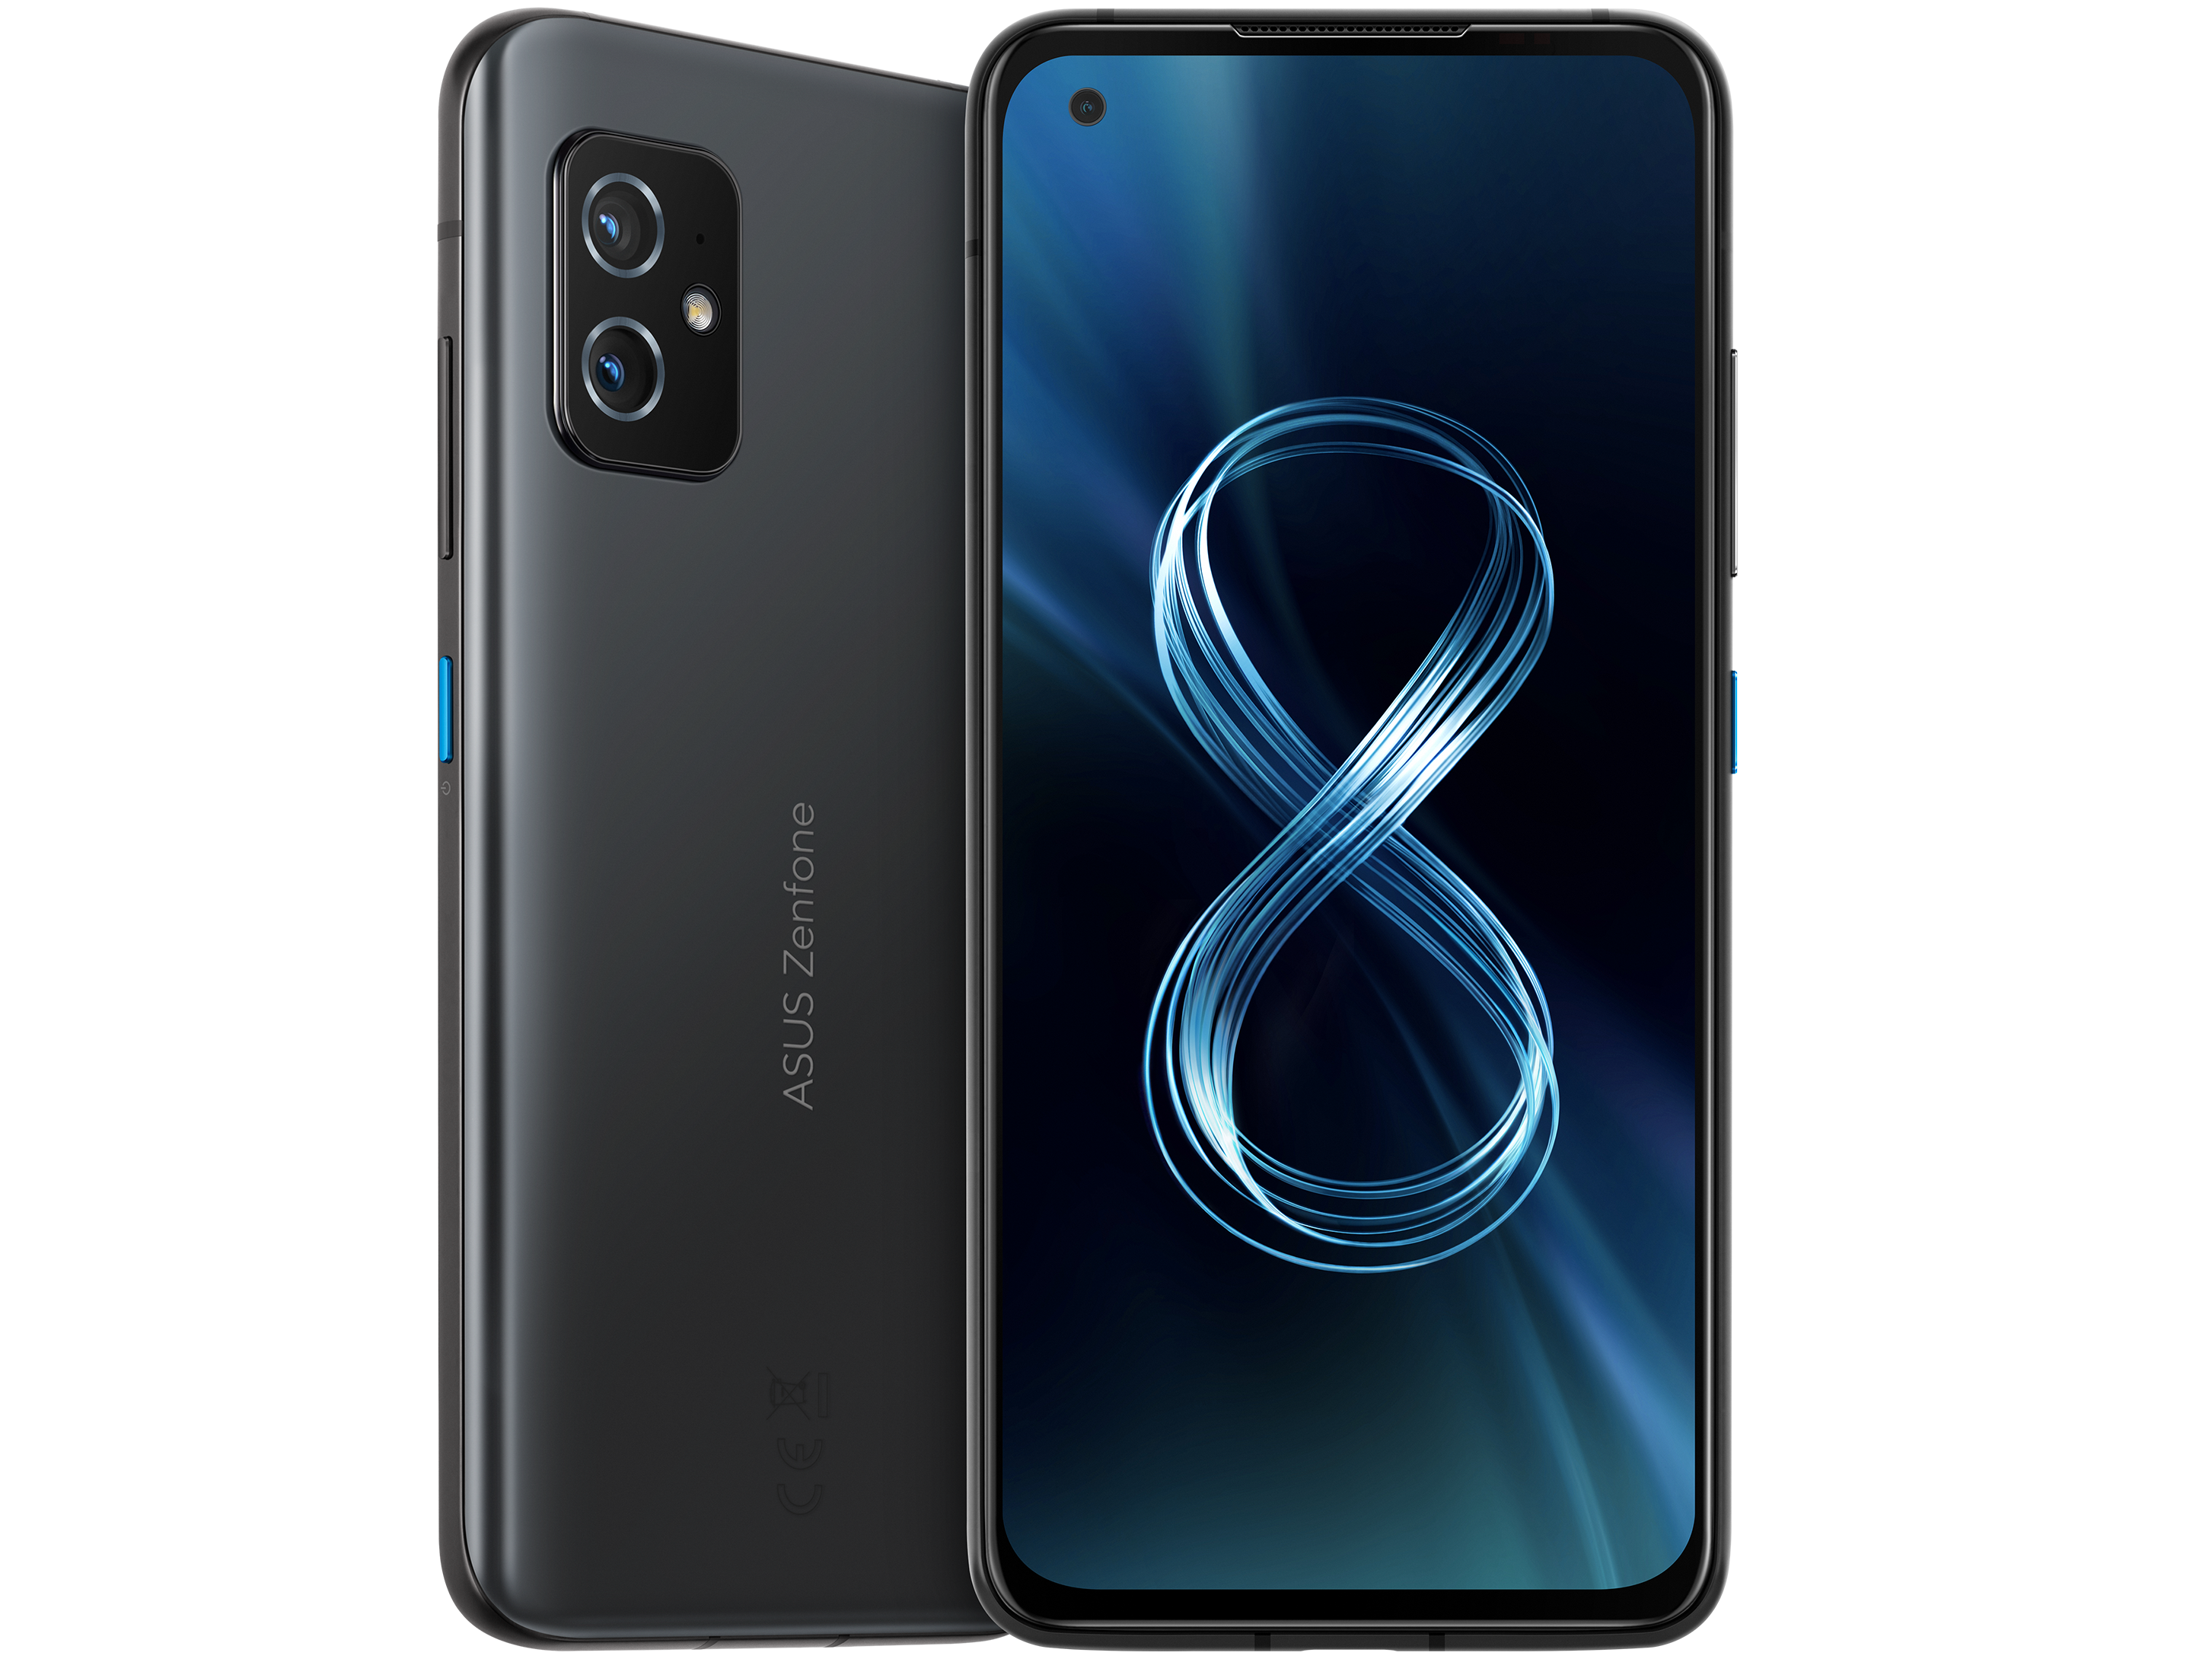 Asus ZenFone 8 smartphone in review: Compact and powerful